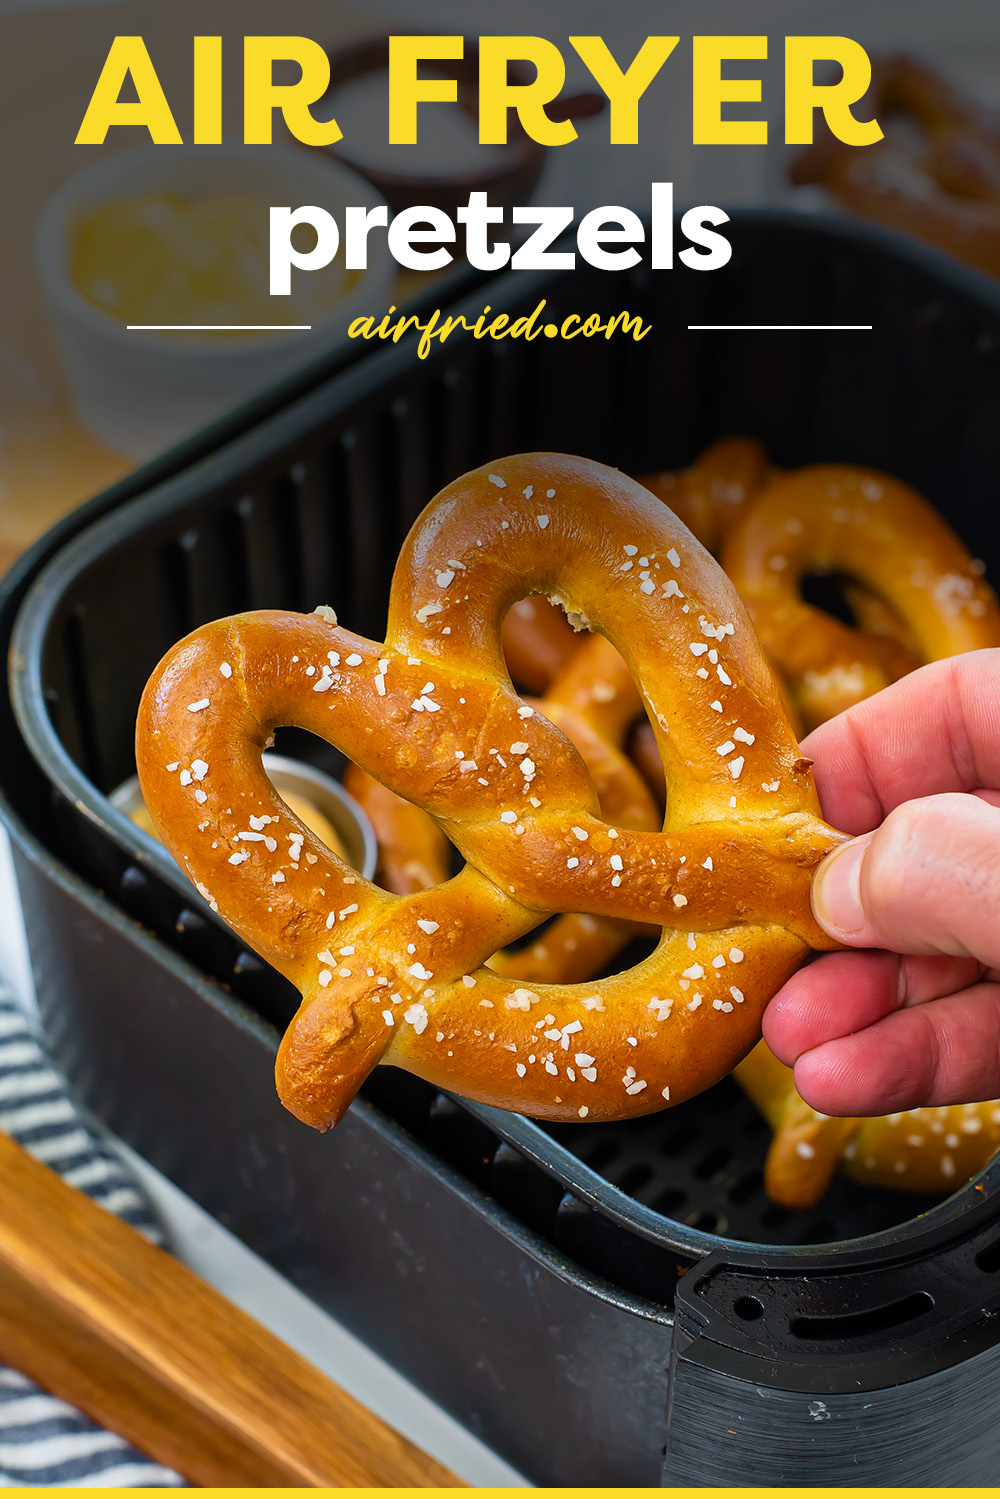 A person holding a cooked pretzel.